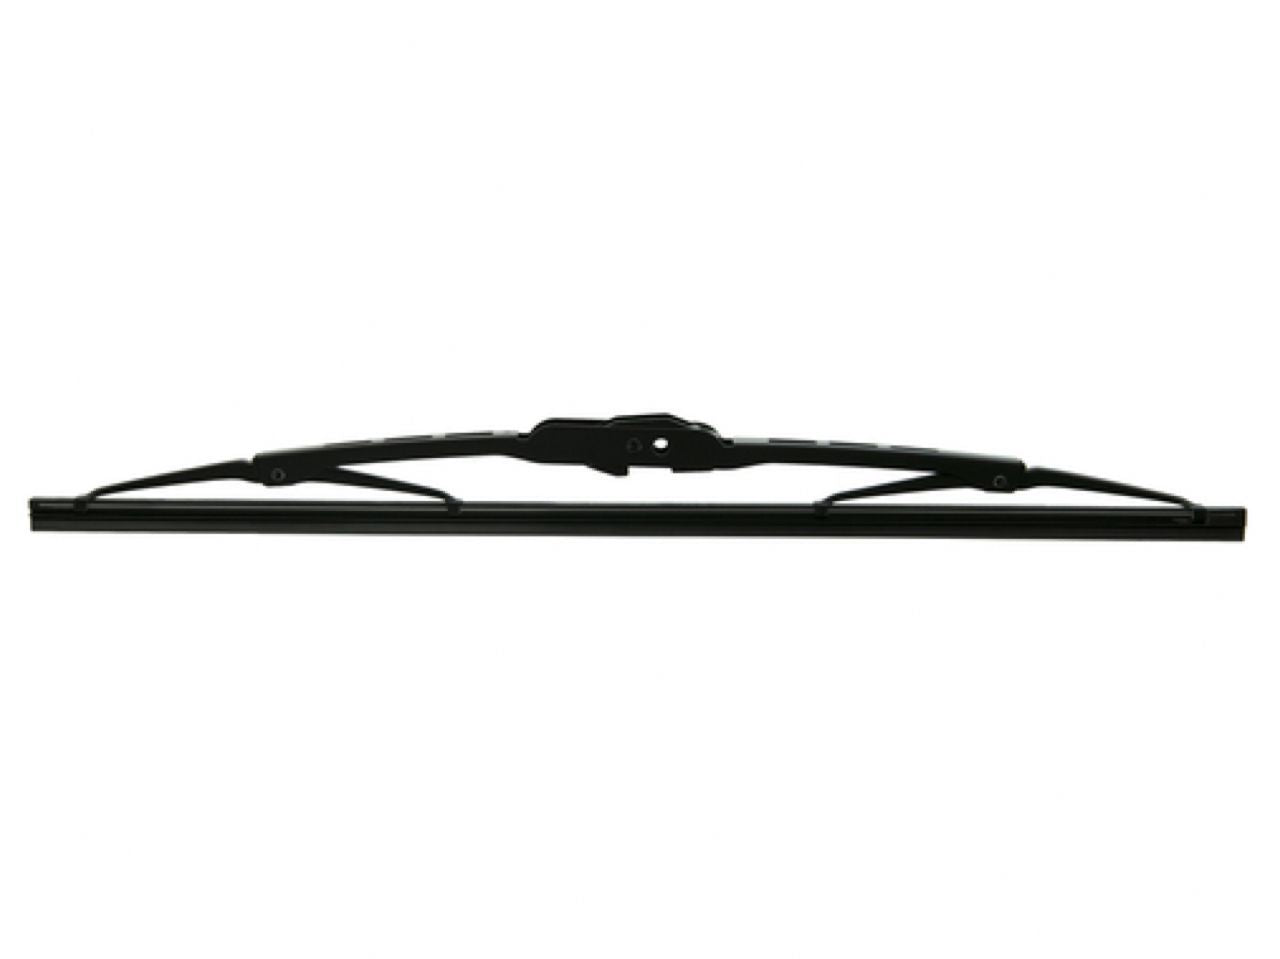 Anco Windshield Wipers 14C-15 Item Image